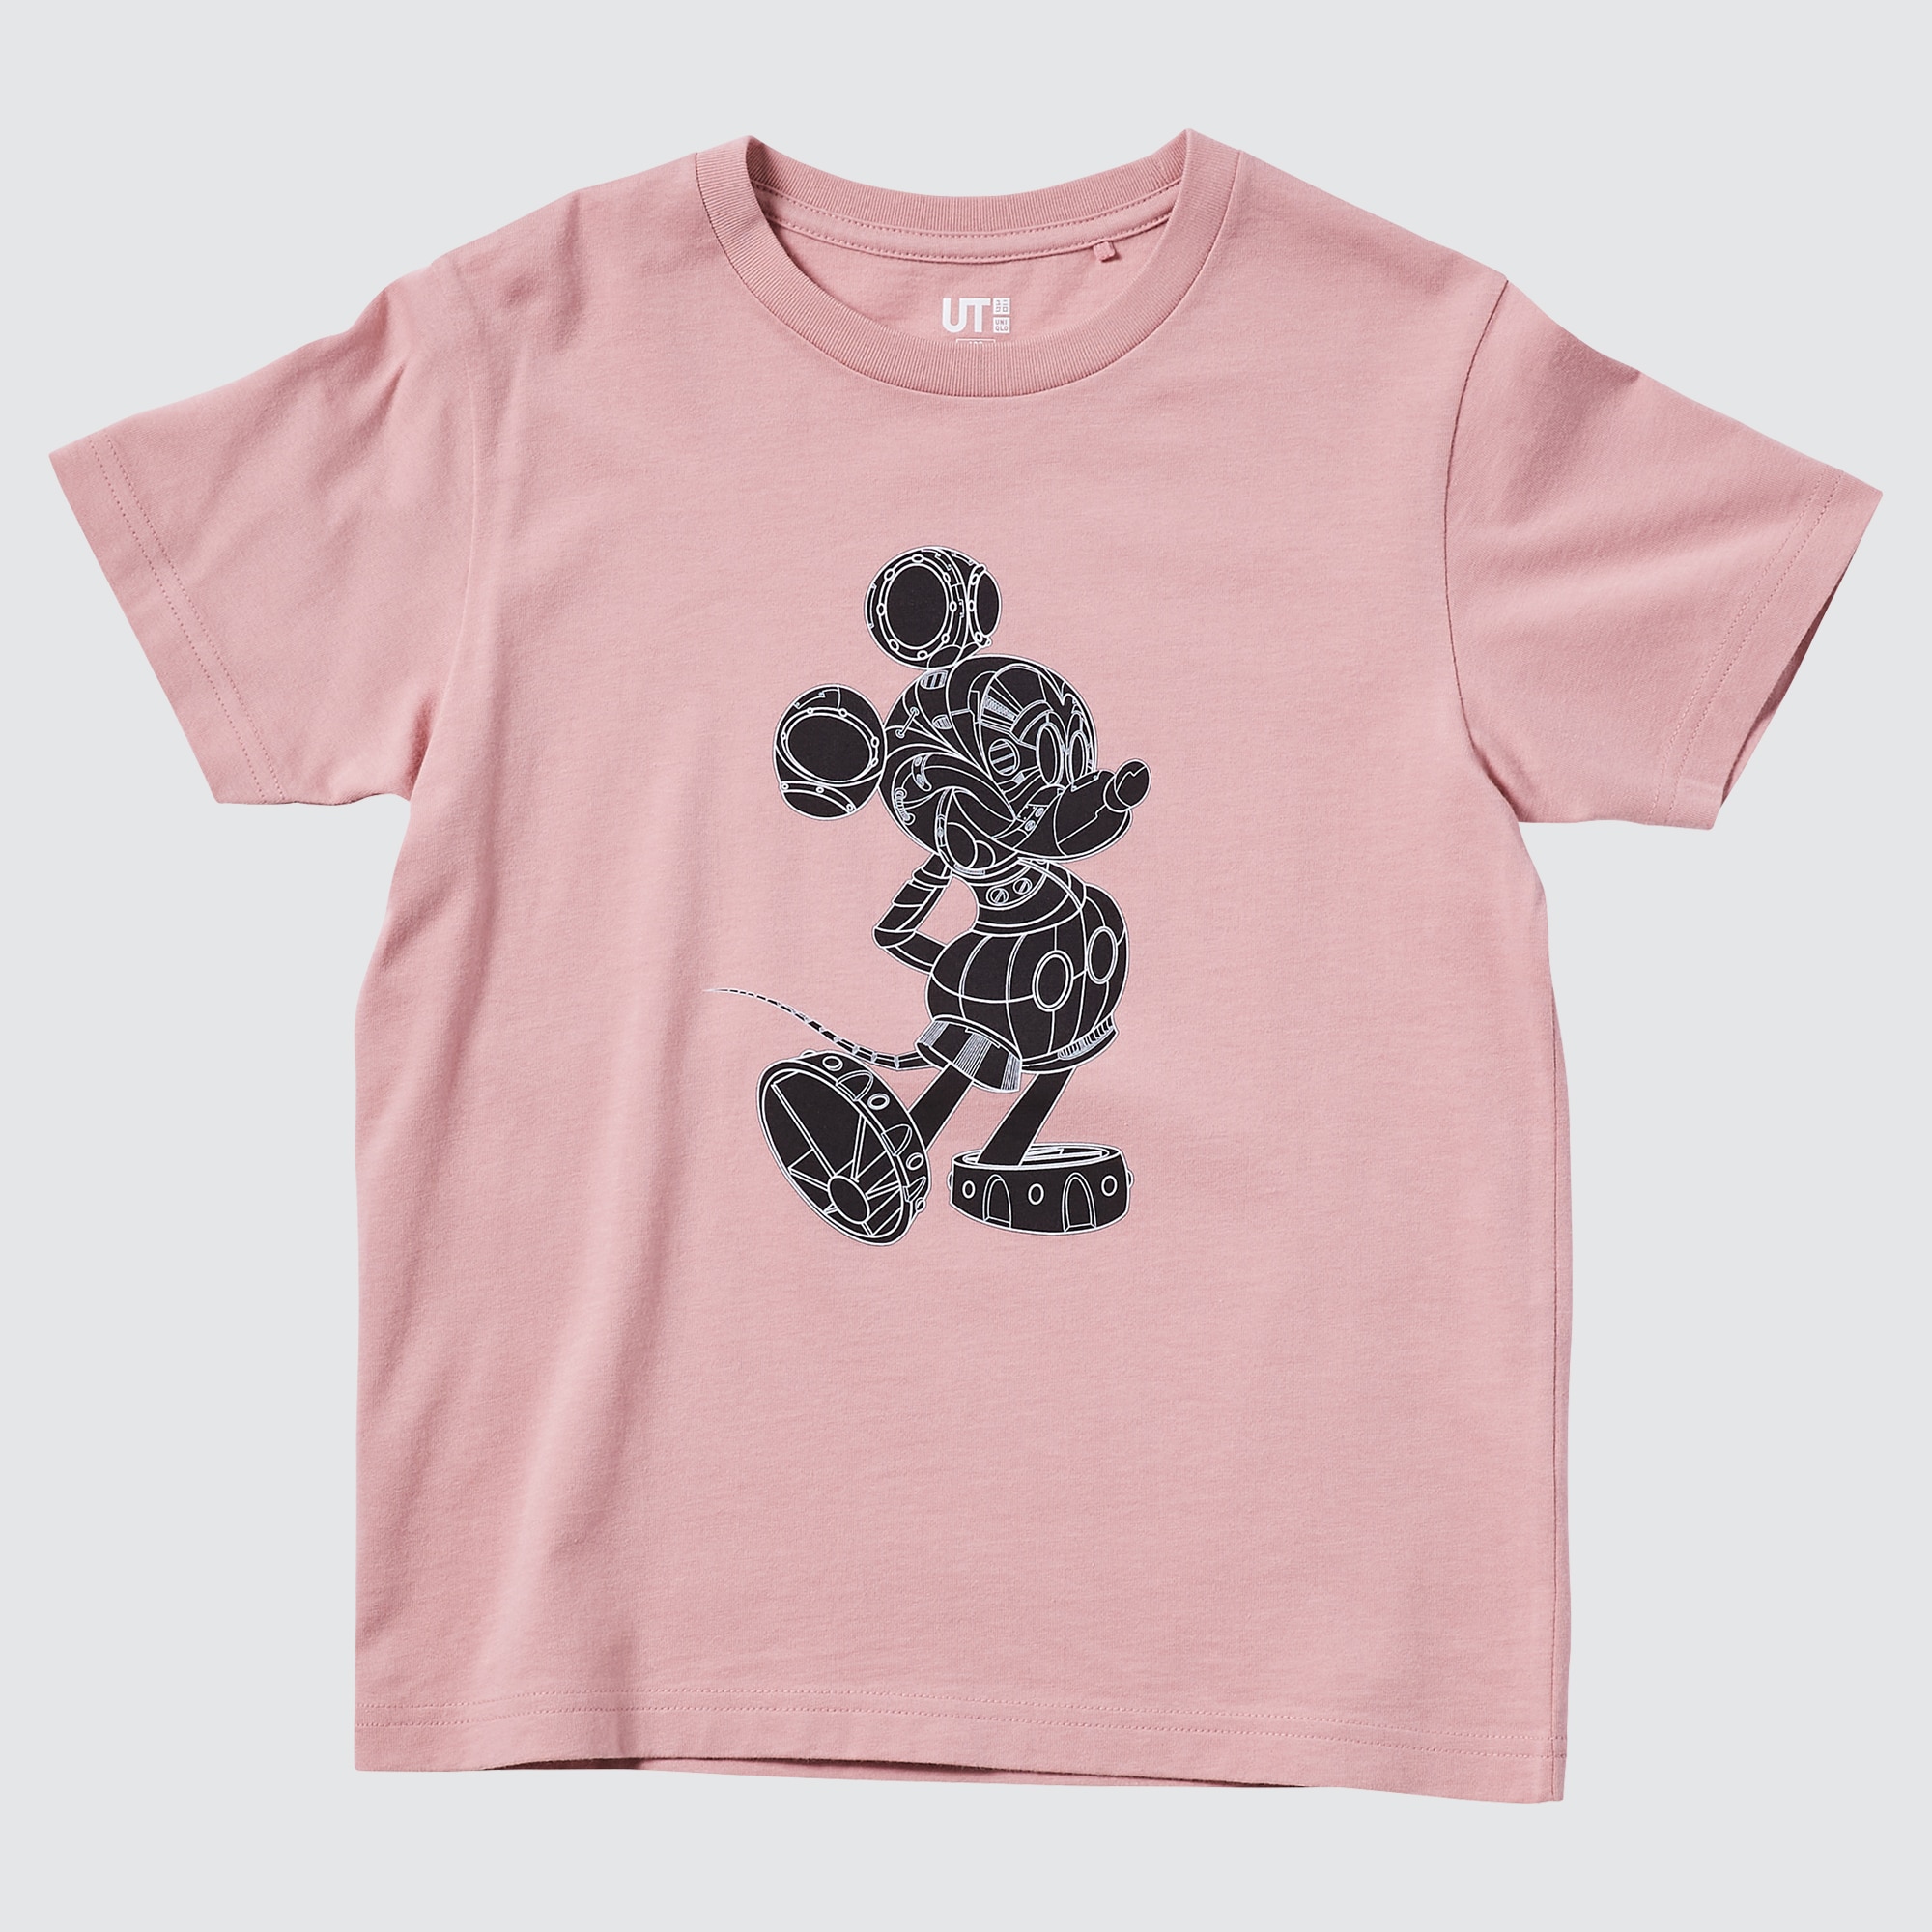 YESASIA UNIQLO  Mickey Mouse in Thailand Muay Thai TShirt White Size  XXL Celebrity GiftsPHOTOPOSTER   Lifestyle  Gifts  Free Shipping   North America Site